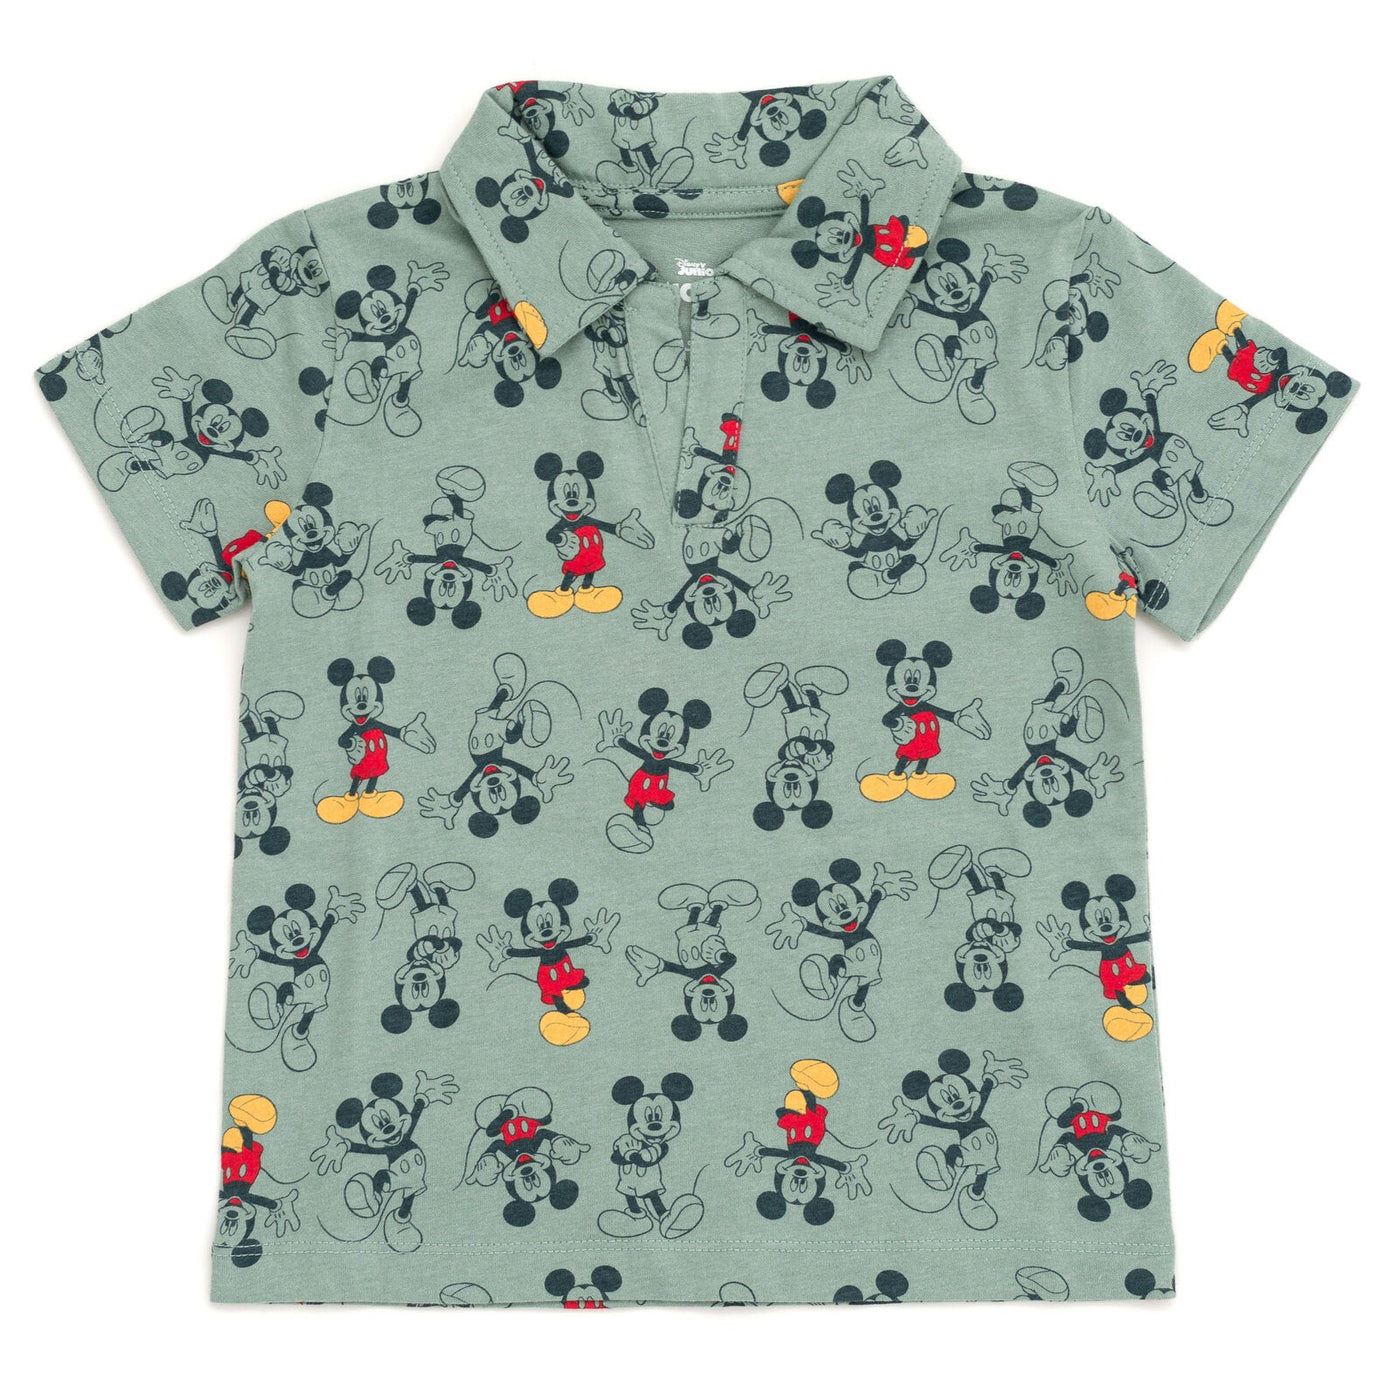 Disney Mickey Mouse Polo Shirt and Twill Shorts Outfit Set - imagikids